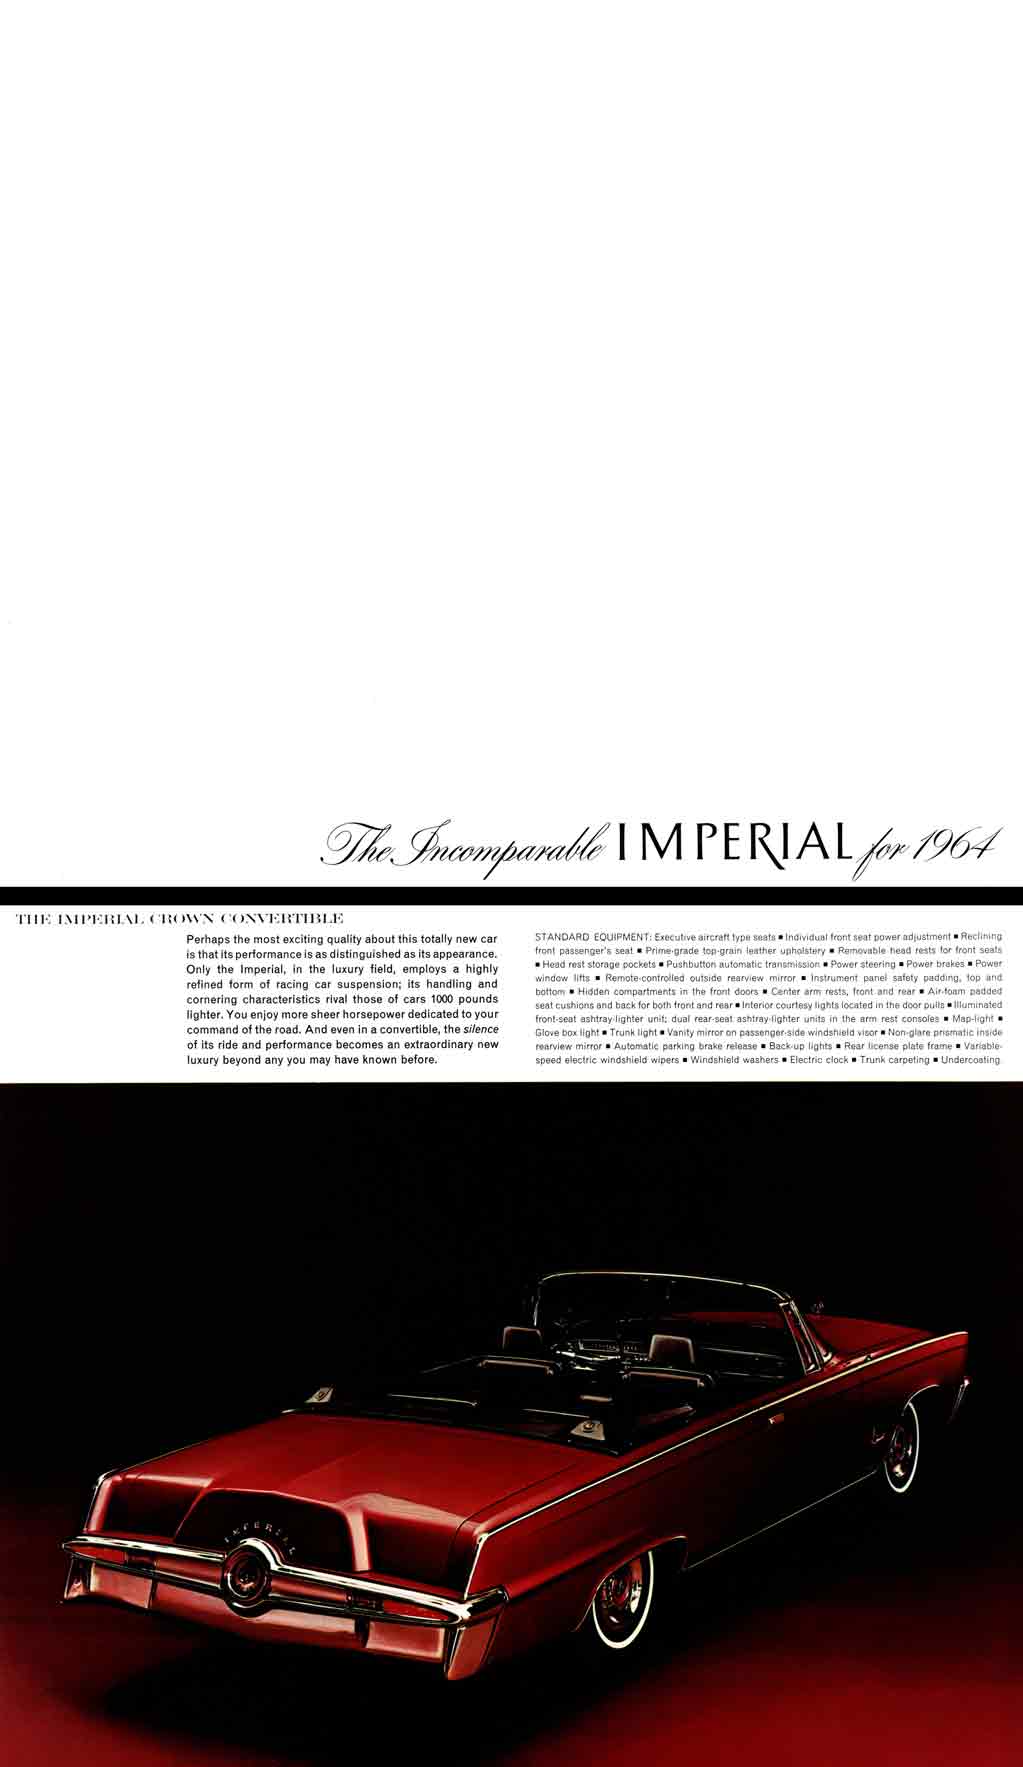 Chrysler Imperial 1964 - The Incomparable Imperial for 1964